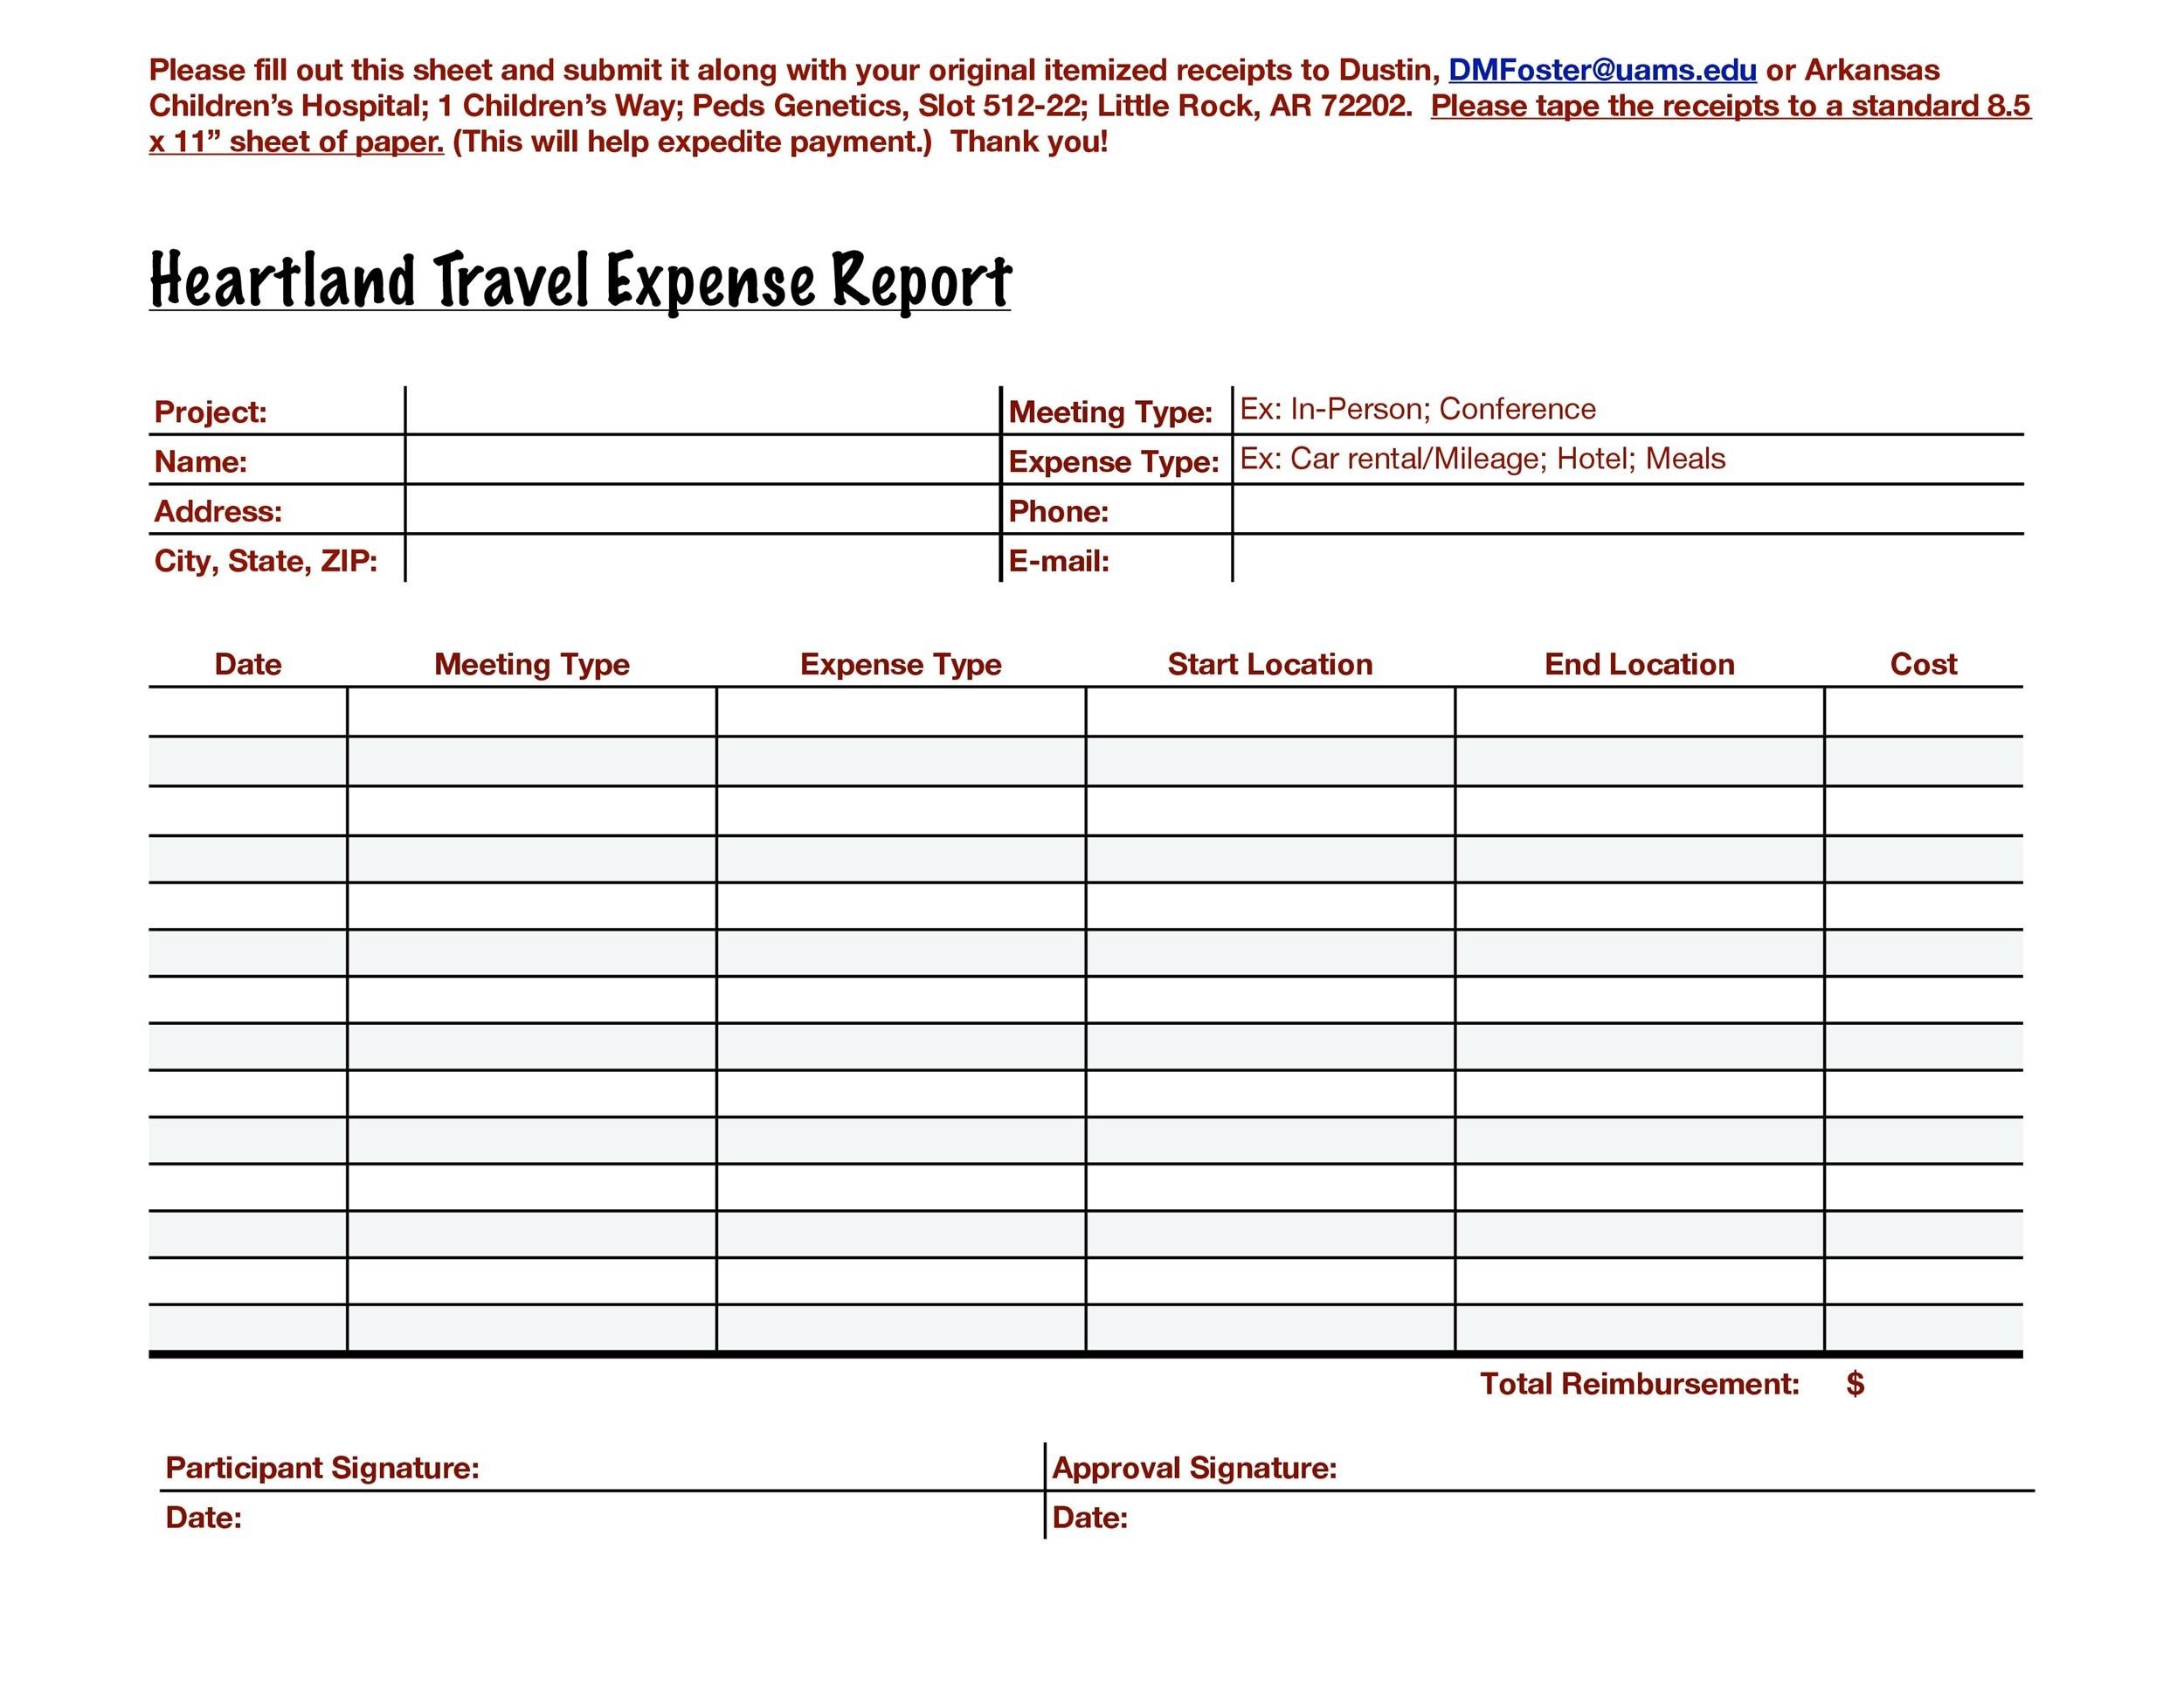 40+ Expense Report Templates to Help you Save Money ᐅ TemplateLab